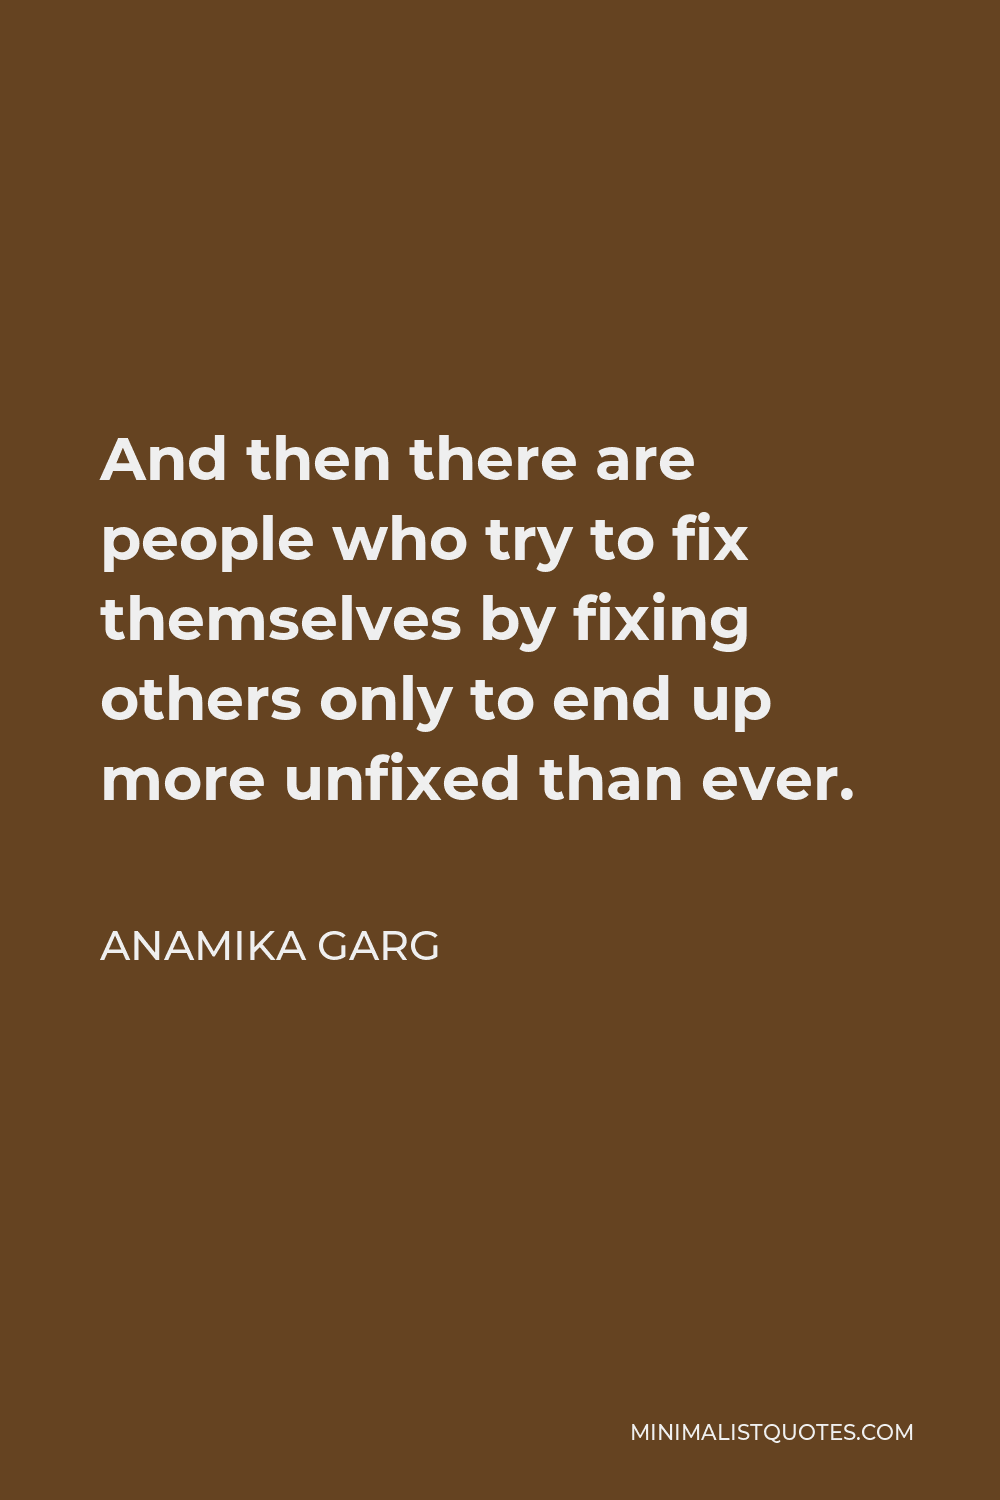 Anamika Garg Quote - And then there are people who try to fix themselves by fixing others only to end up more unfixed than ever.